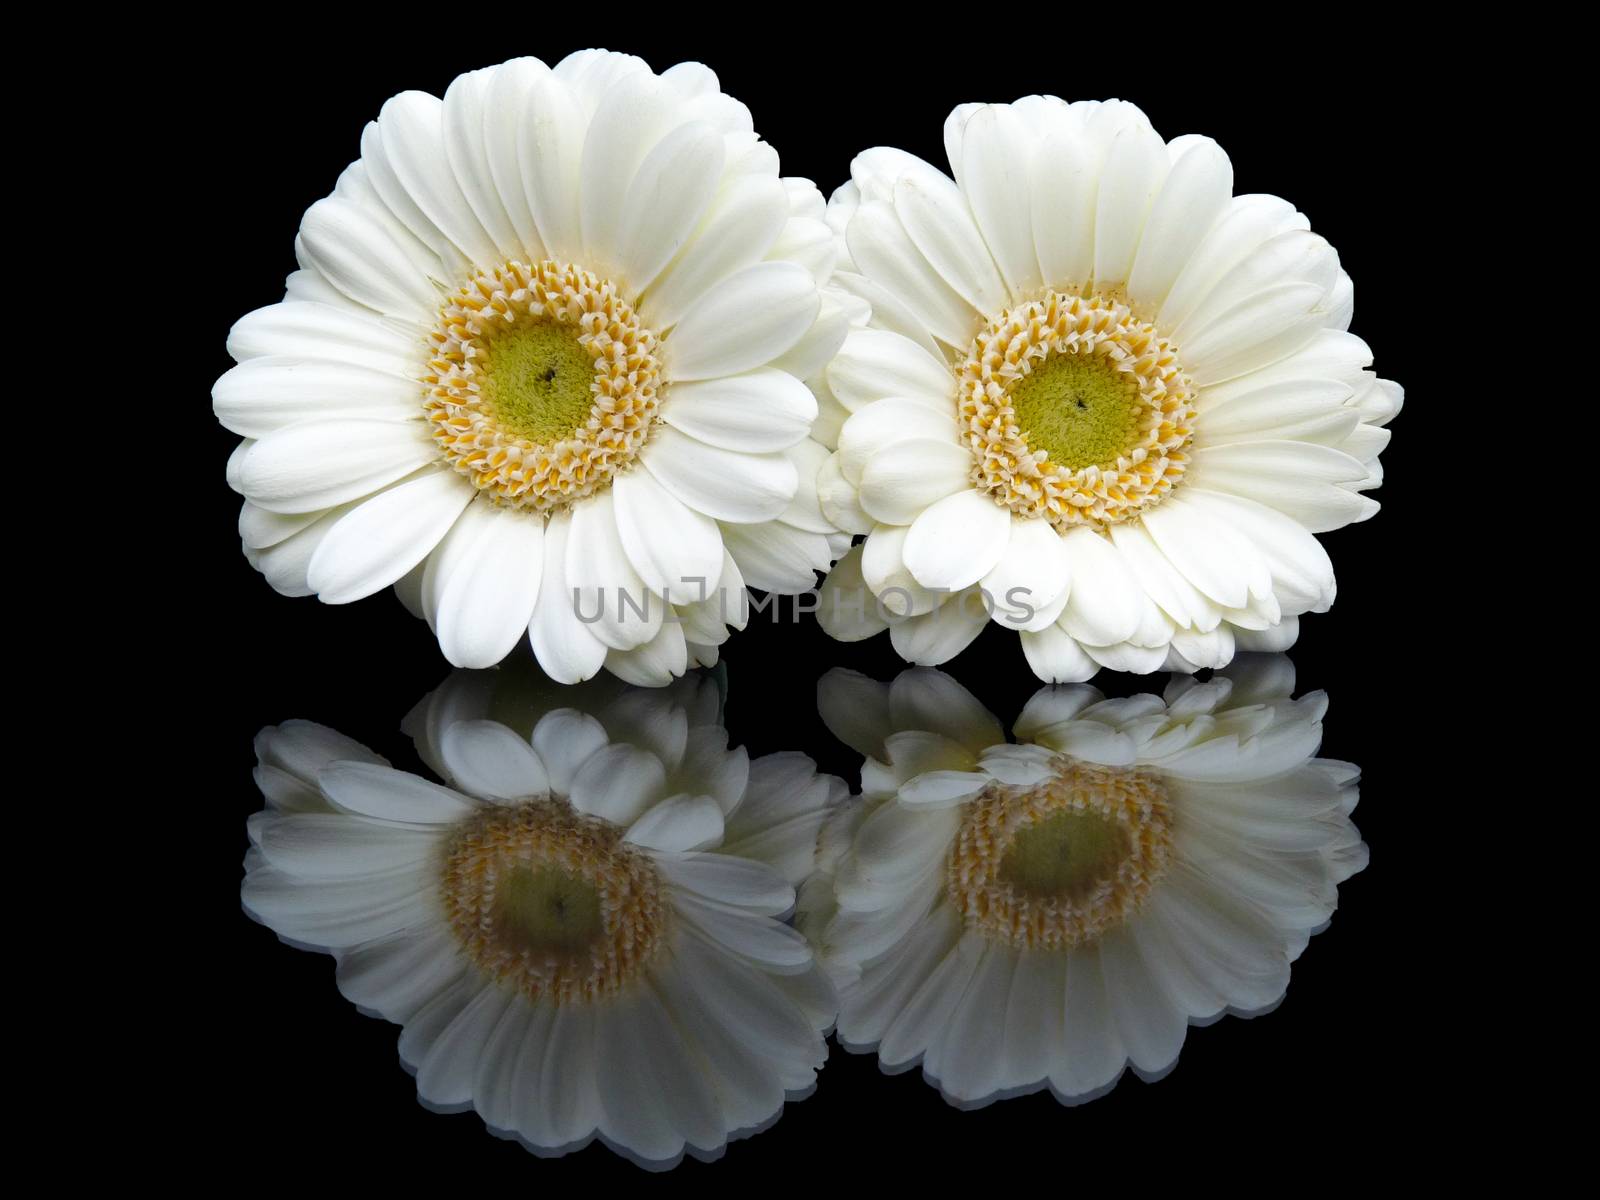 Two white flowers with mirror image isolated on black background by BenSchonewille